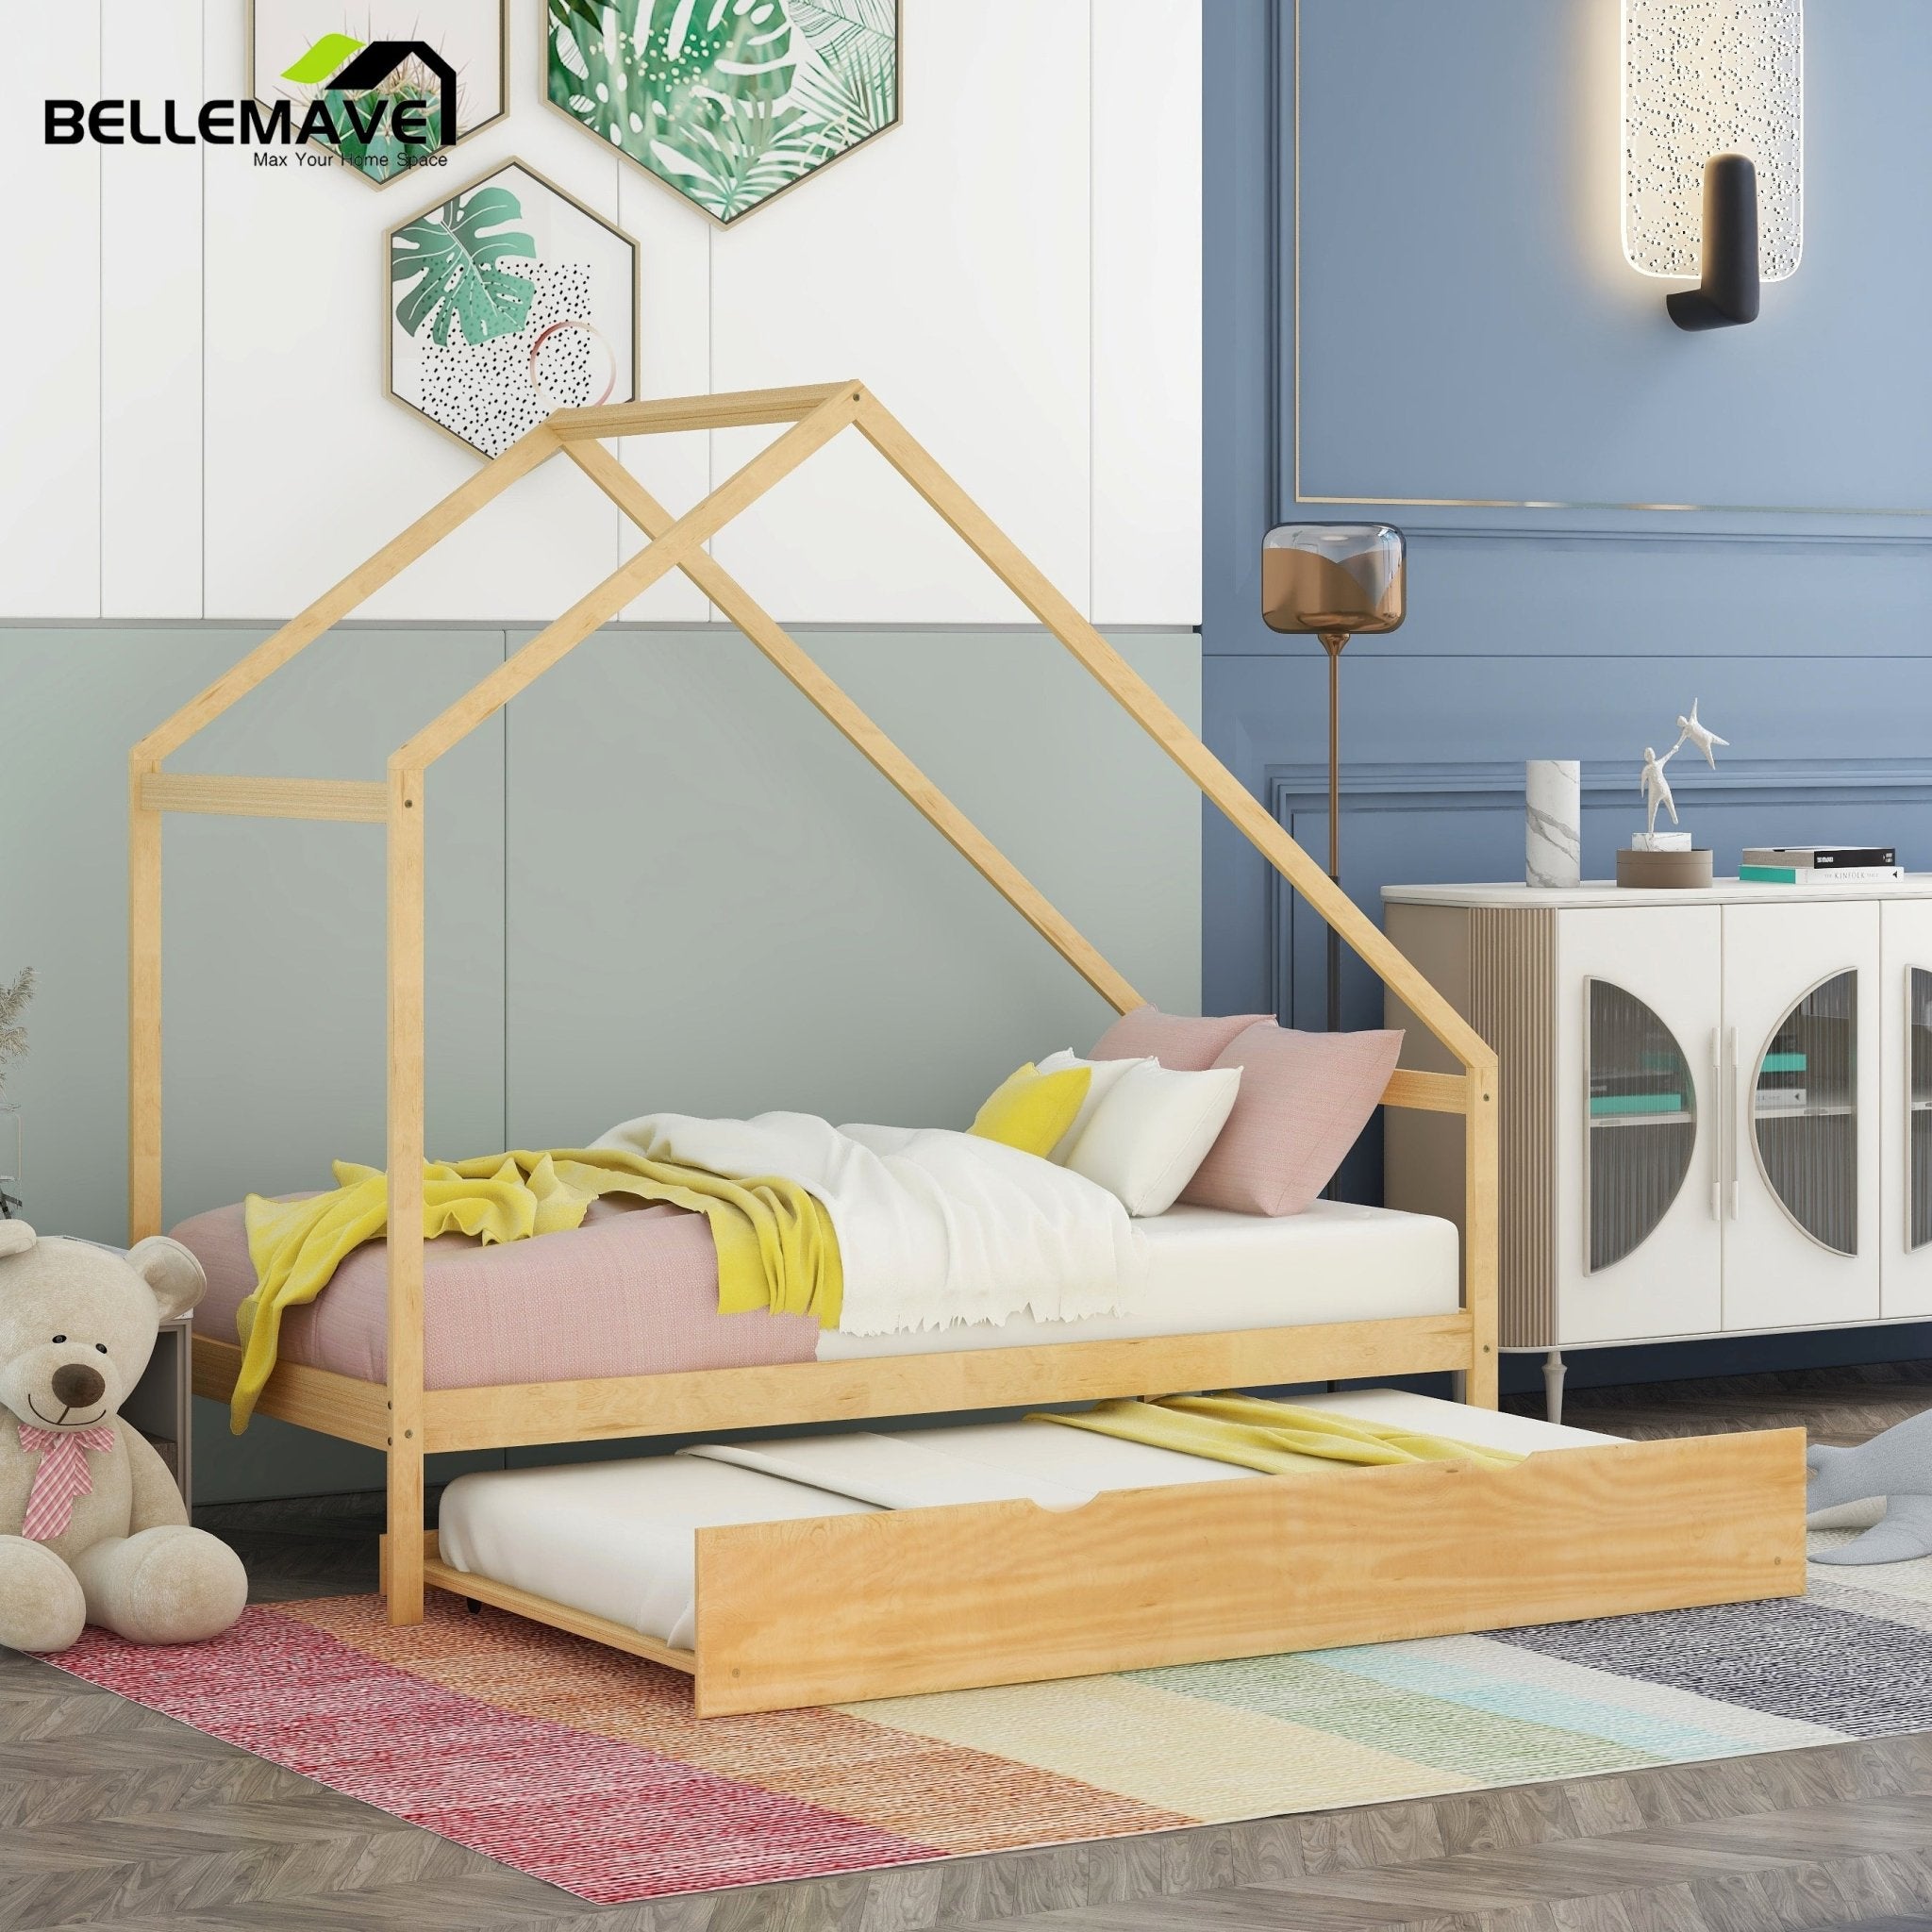 Bellemave Twin Size House Bed With Twin Size Trundle - Bellemave